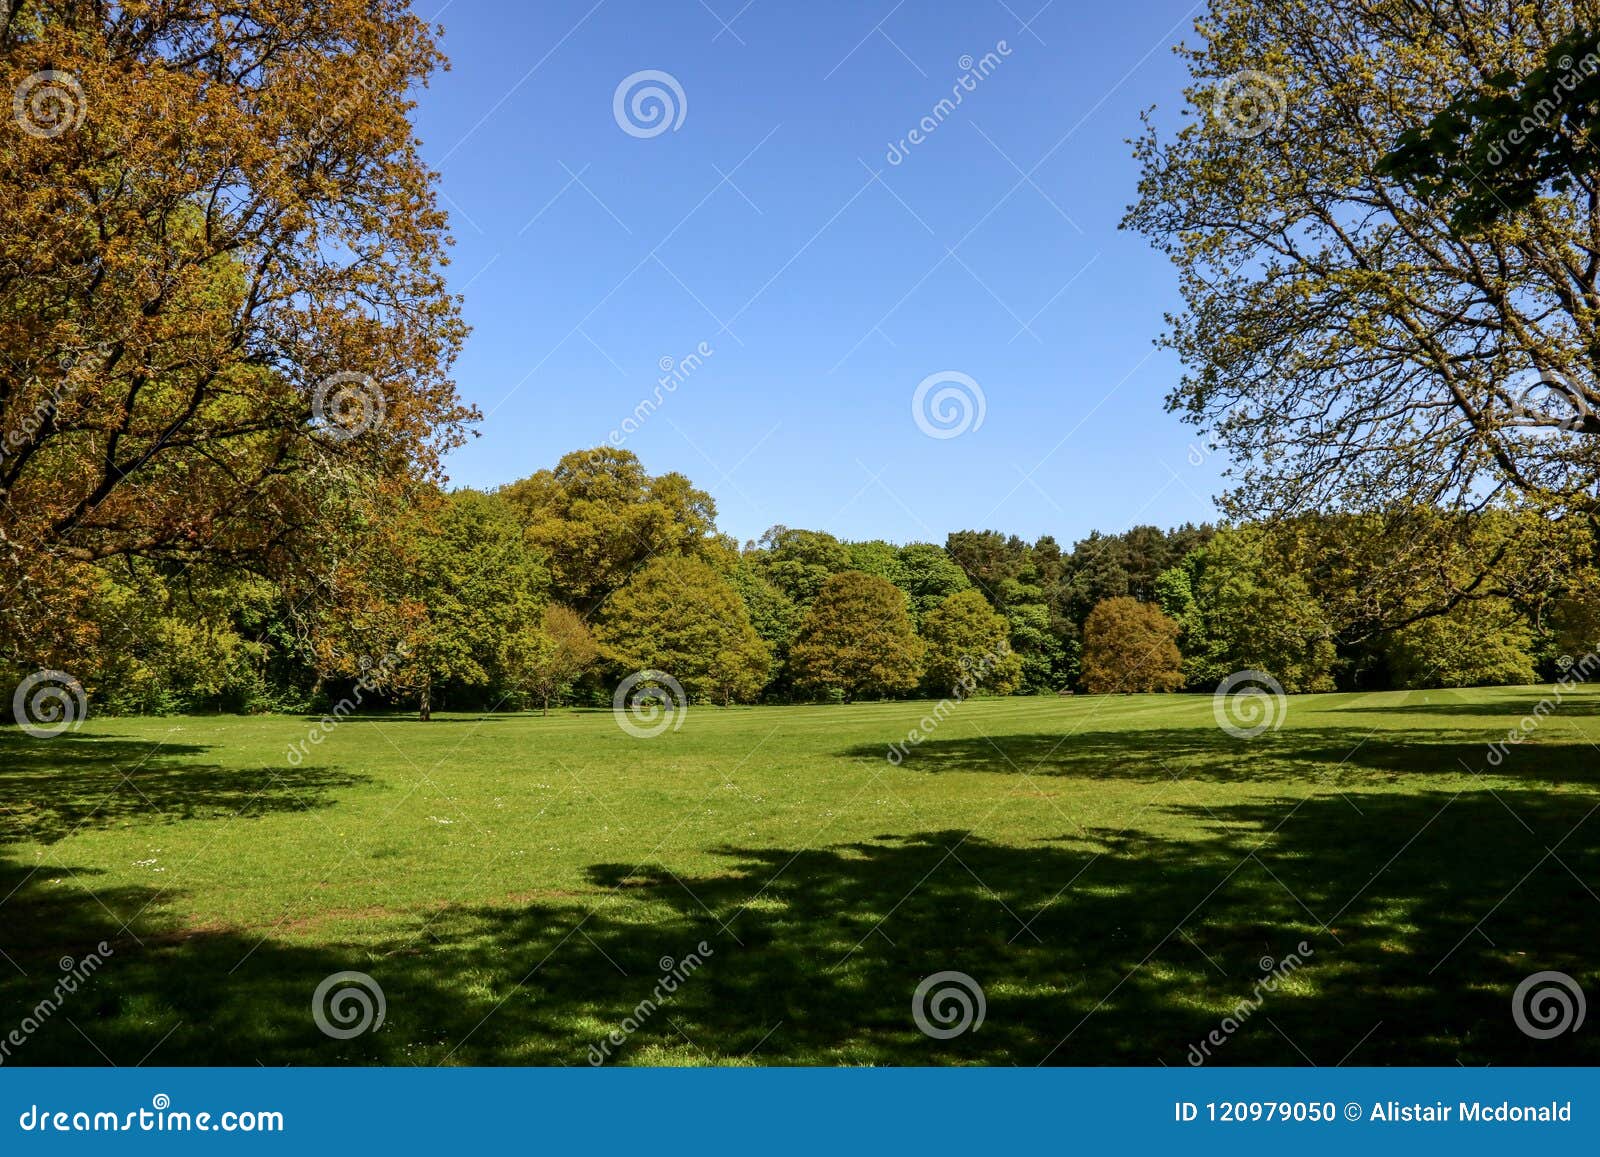 Sunlit Meadow on a Summer Afternoon Stock Photo - Image of shrubs ...